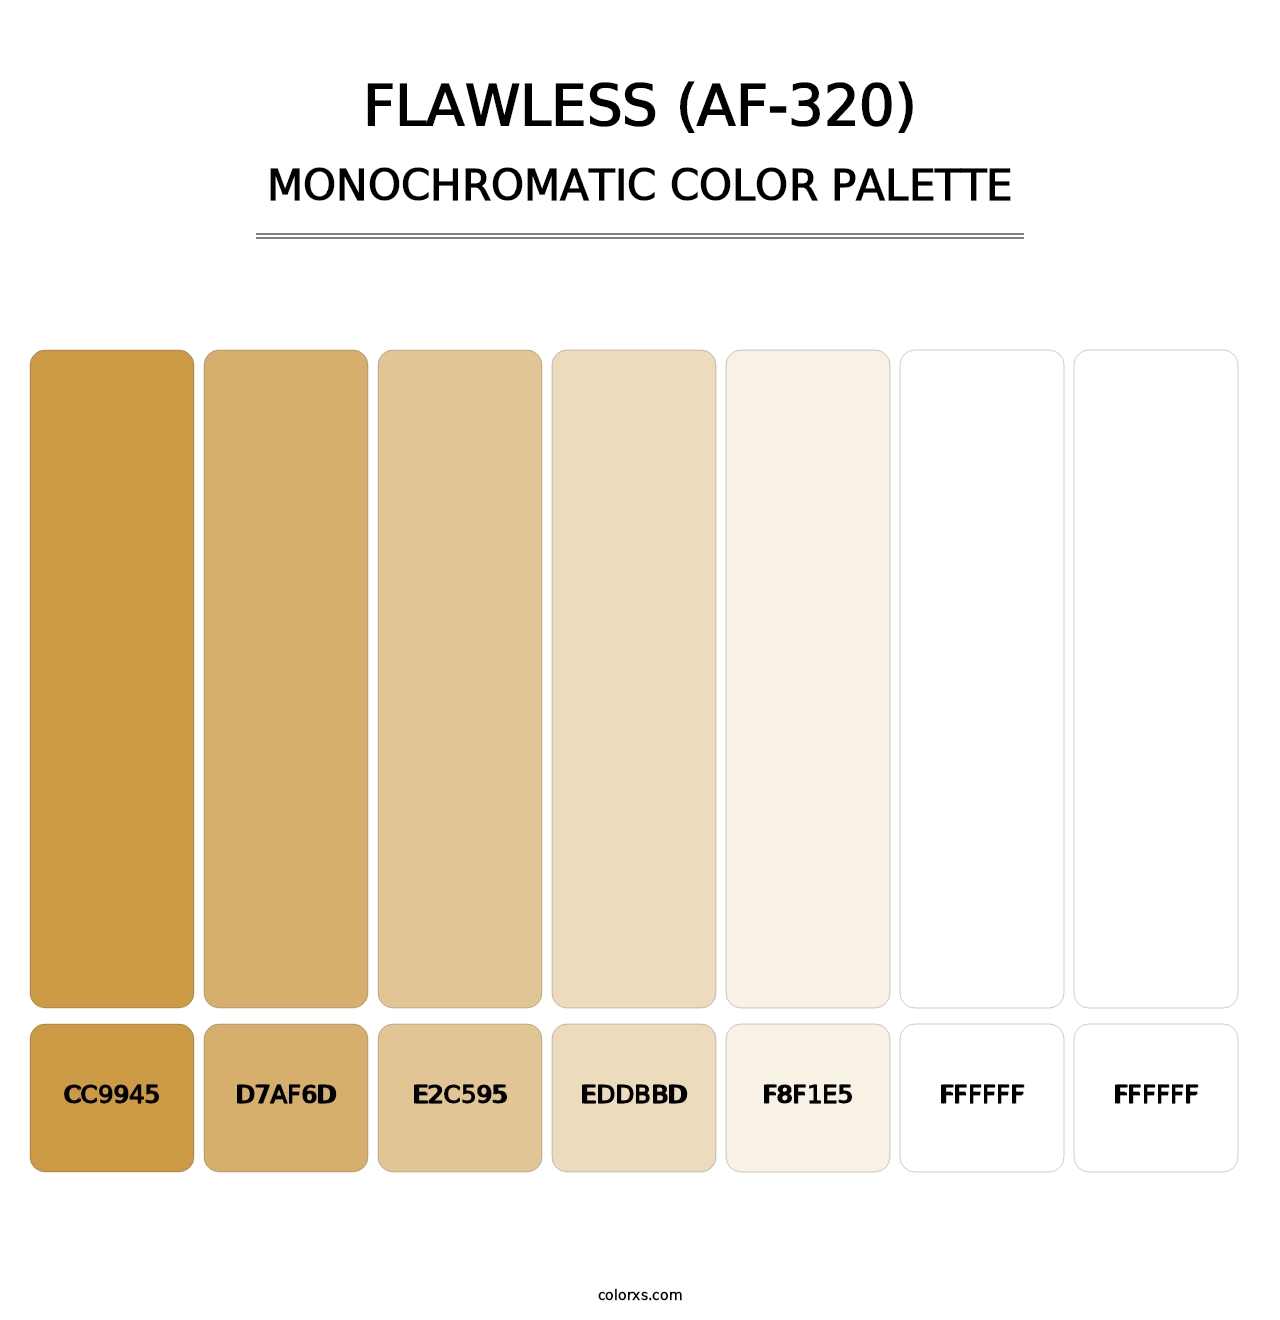 Flawless (AF-320) - Monochromatic Color Palette